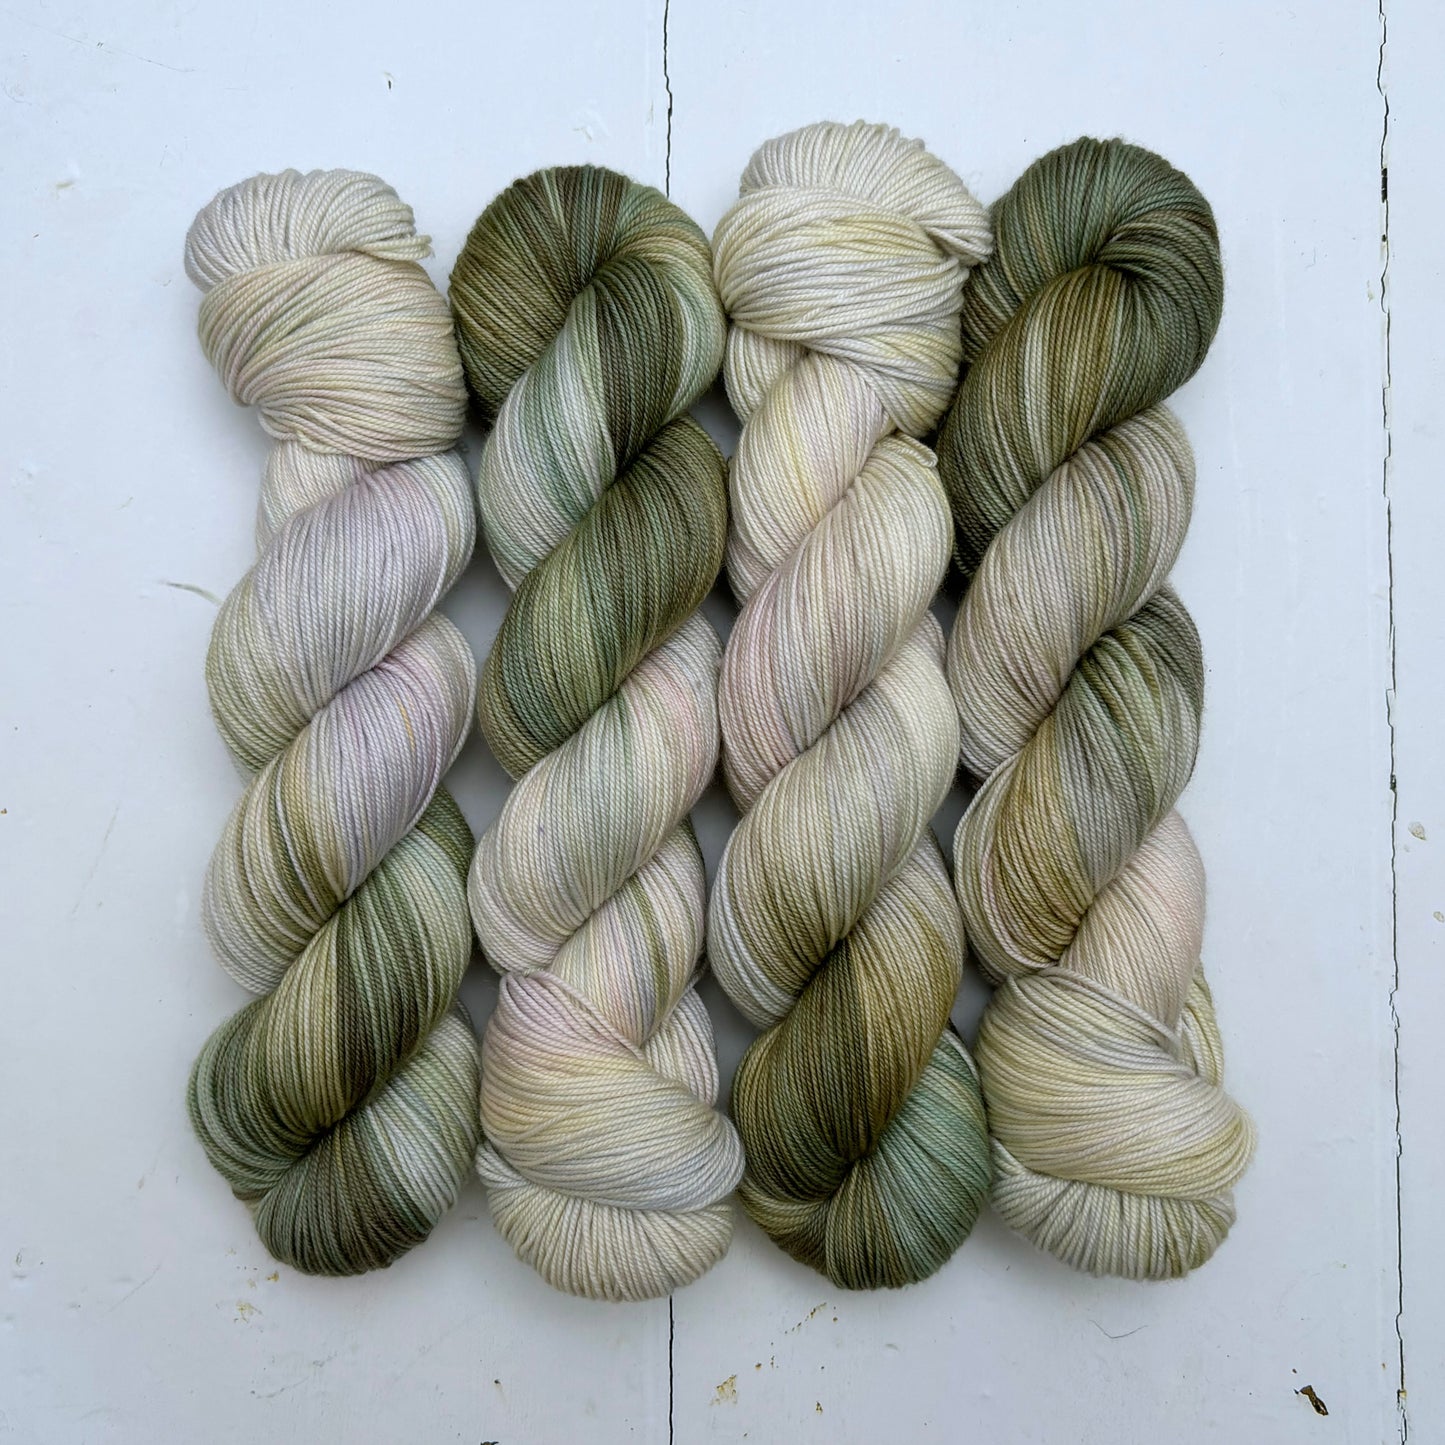 yarn from the meadow - may